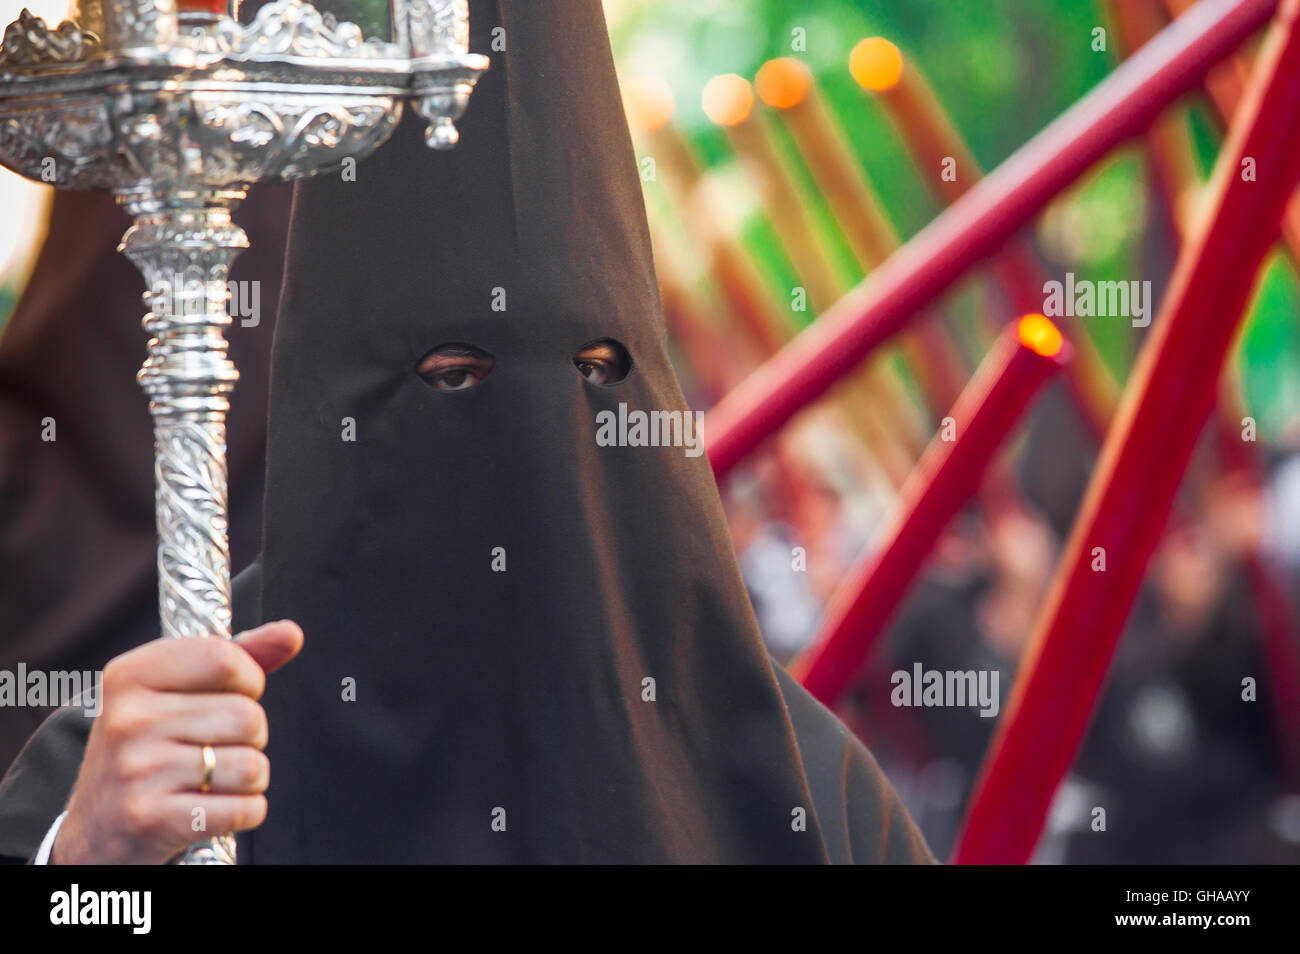 Spain festival, a member of a hooded cofradia (brotherhood) walks in a procession in the Easter Holy Week (Semana Santa) festival in Seville, Spain. Stock Photo